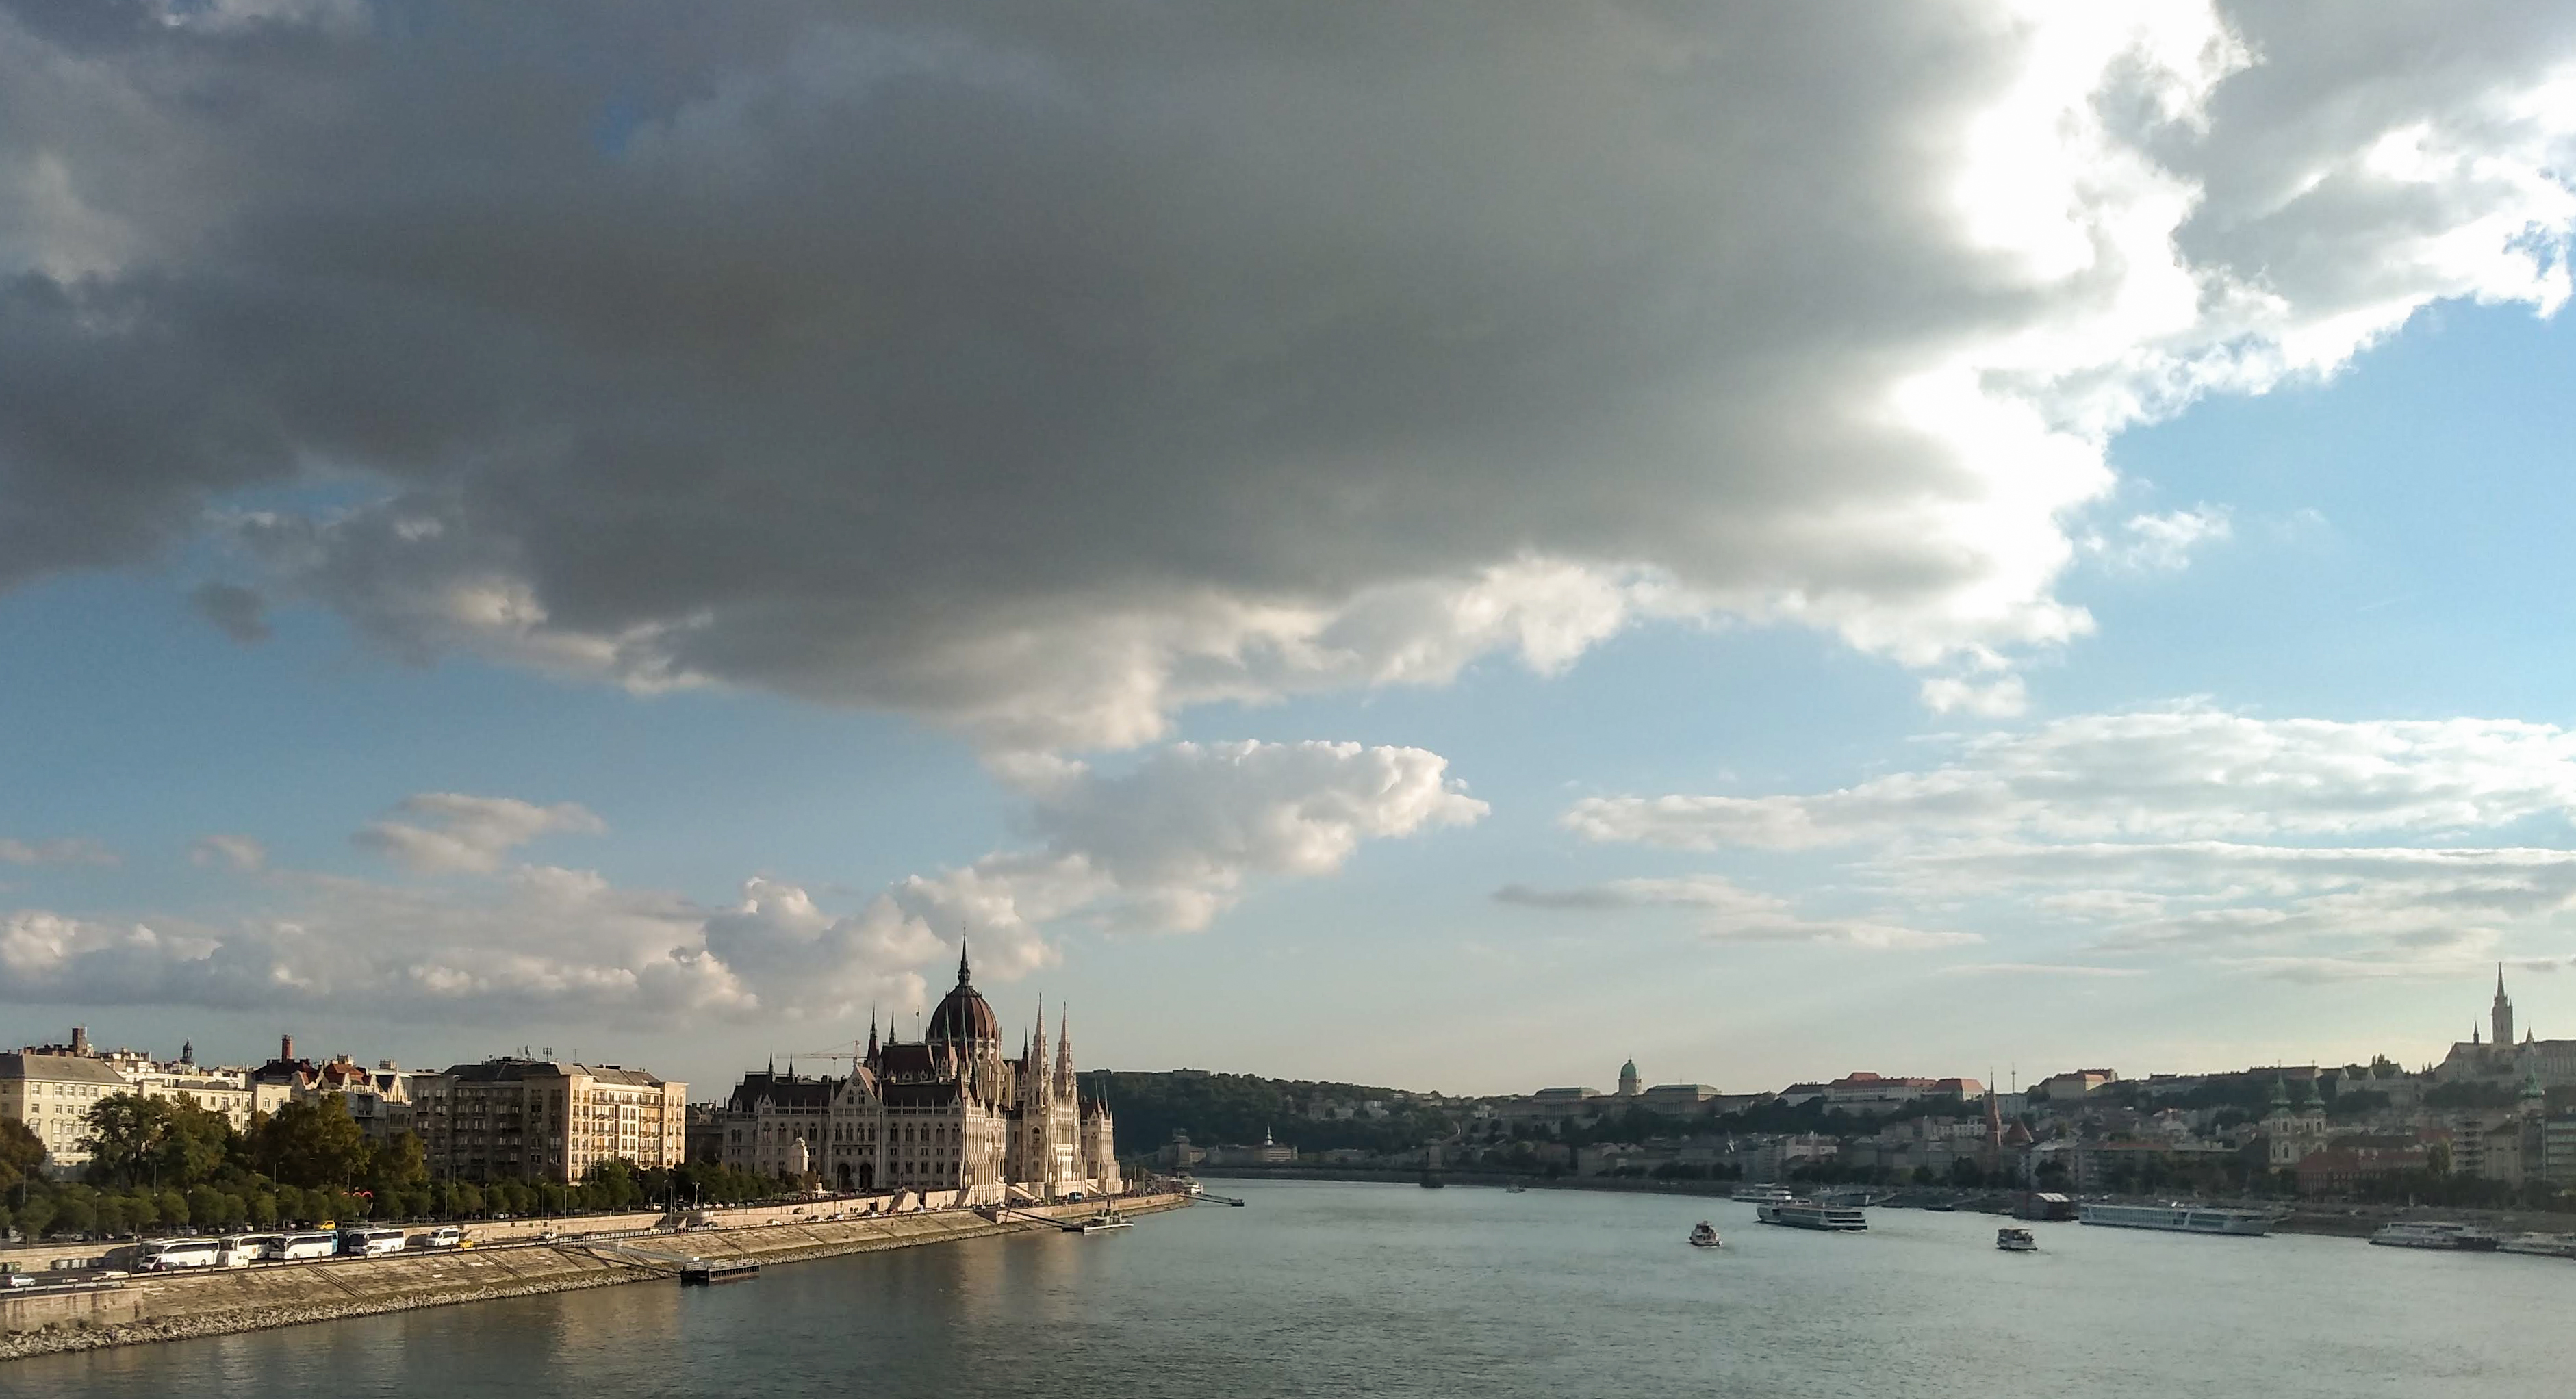 The mighty Danube in Budapest, Hungary